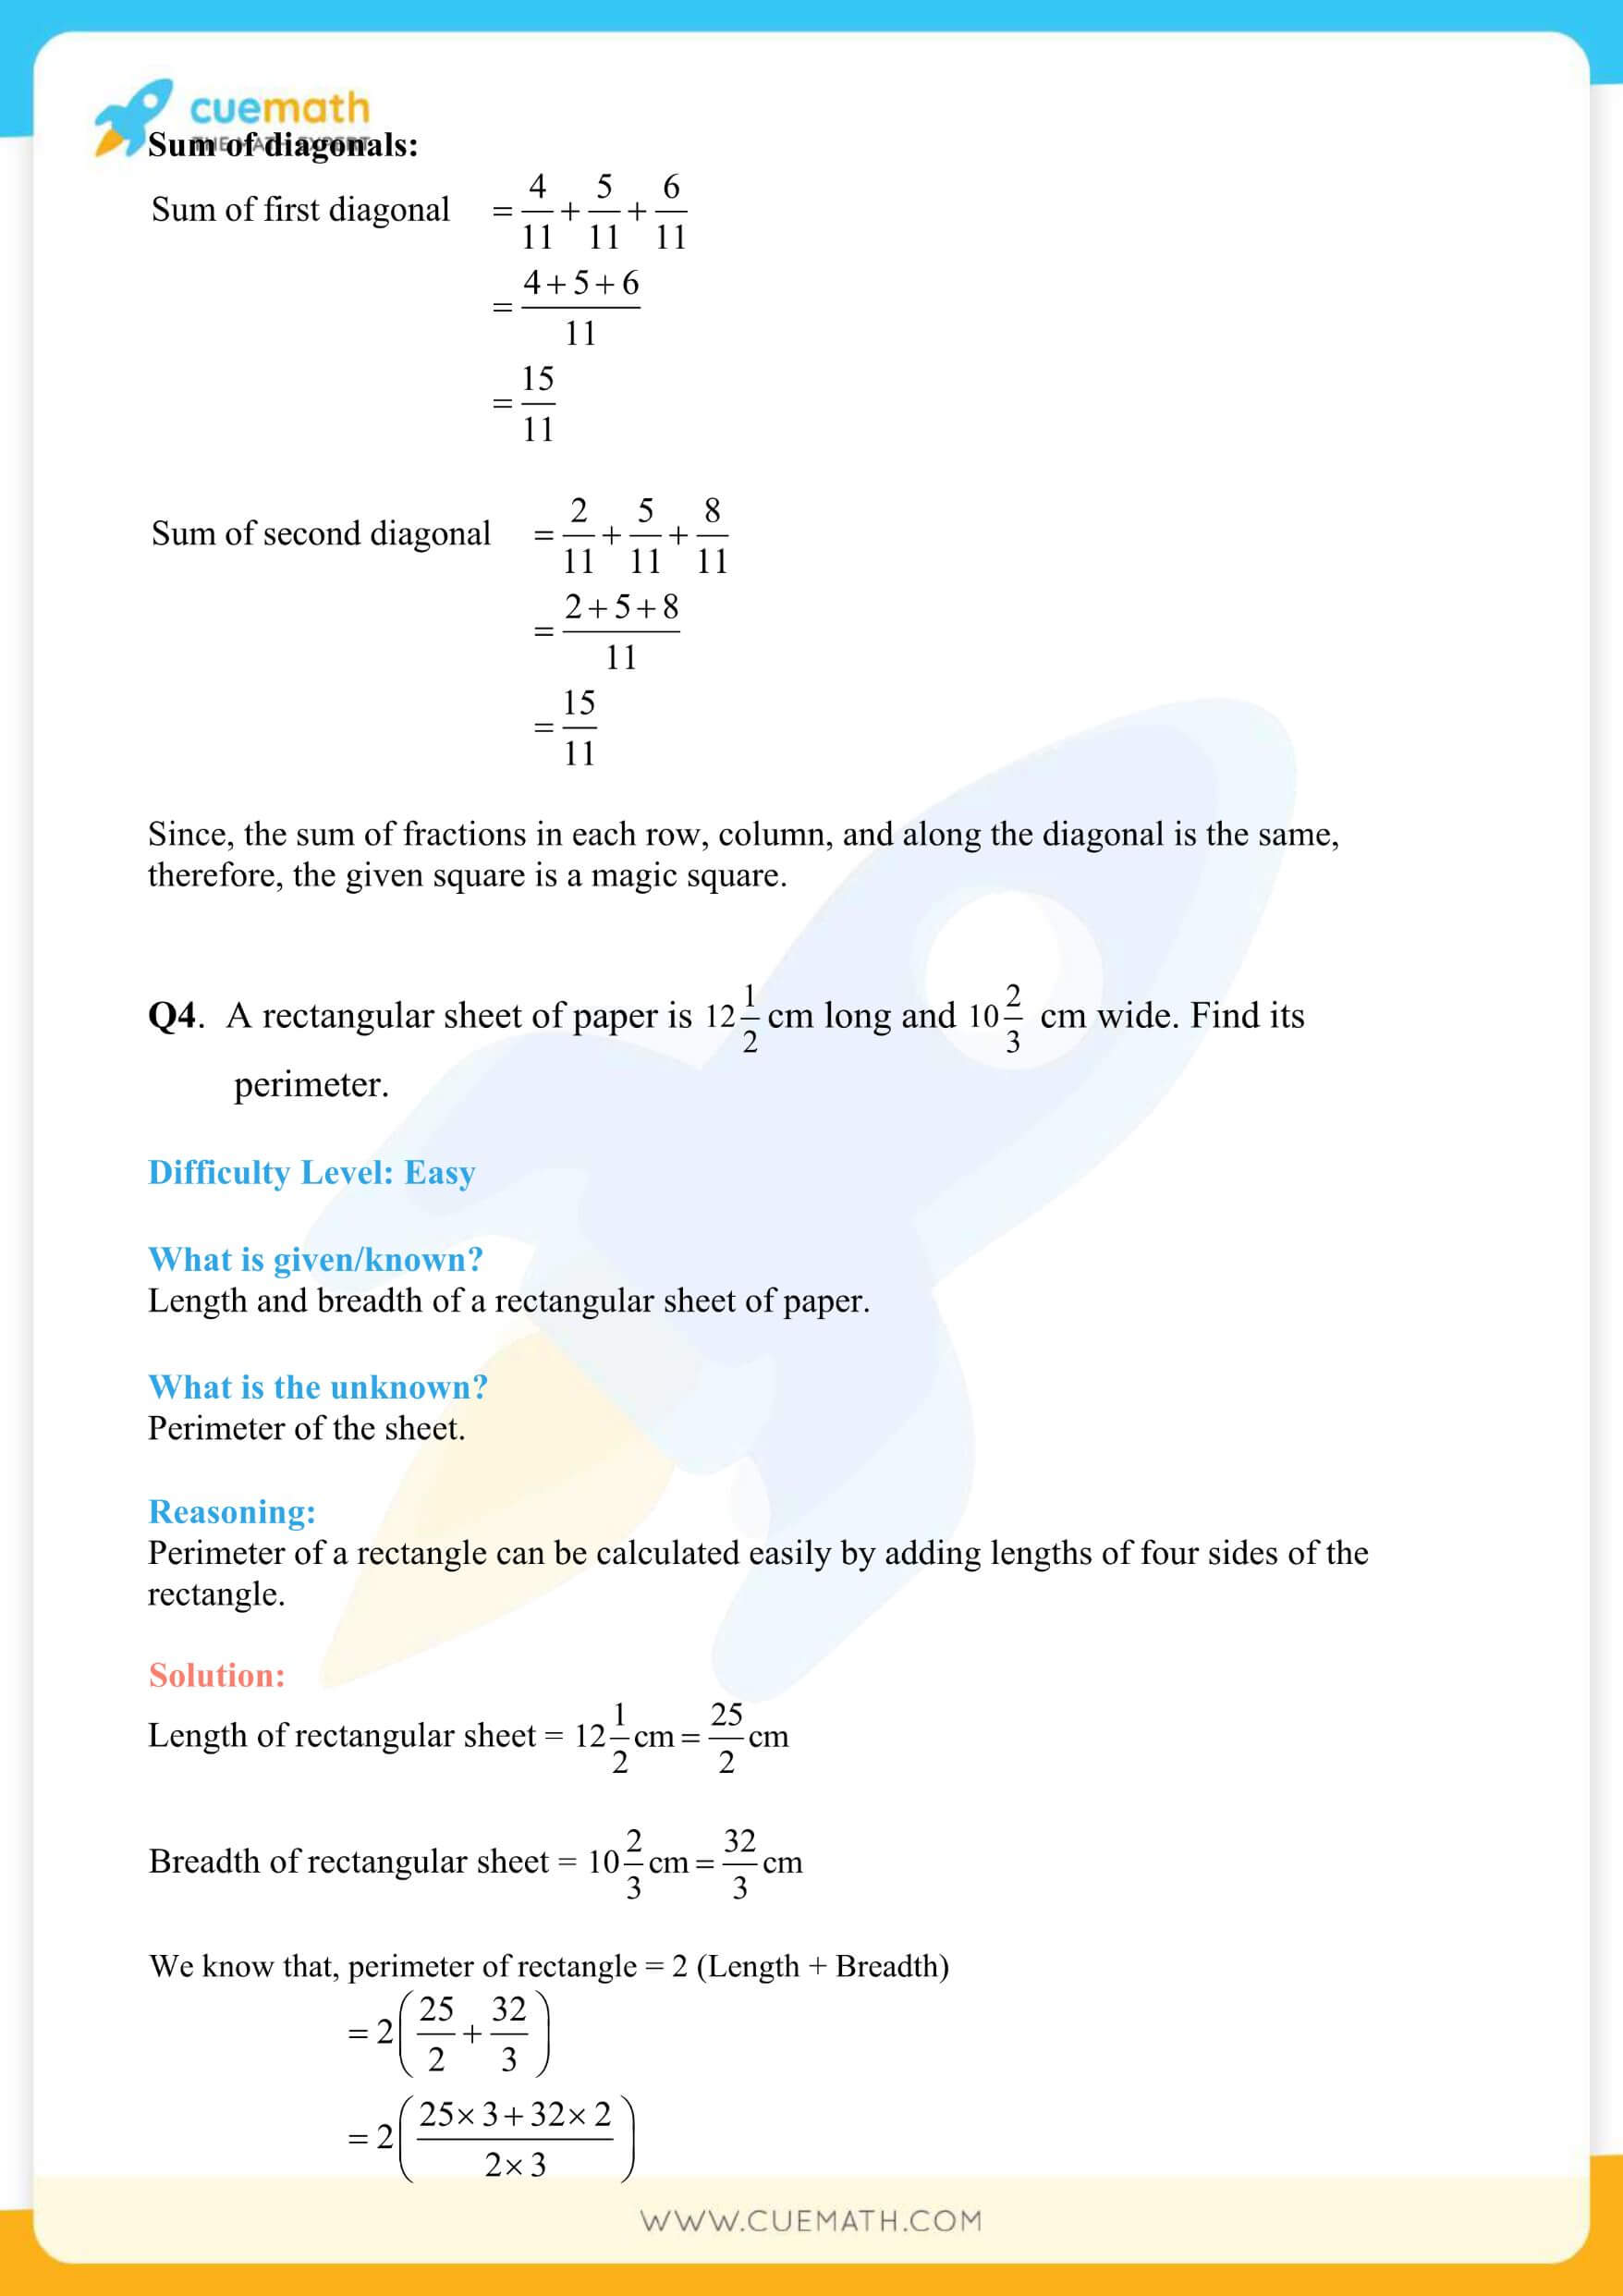 NCERT Solutions Class 7 Math Chapter 2 Fractions And Decimals 5